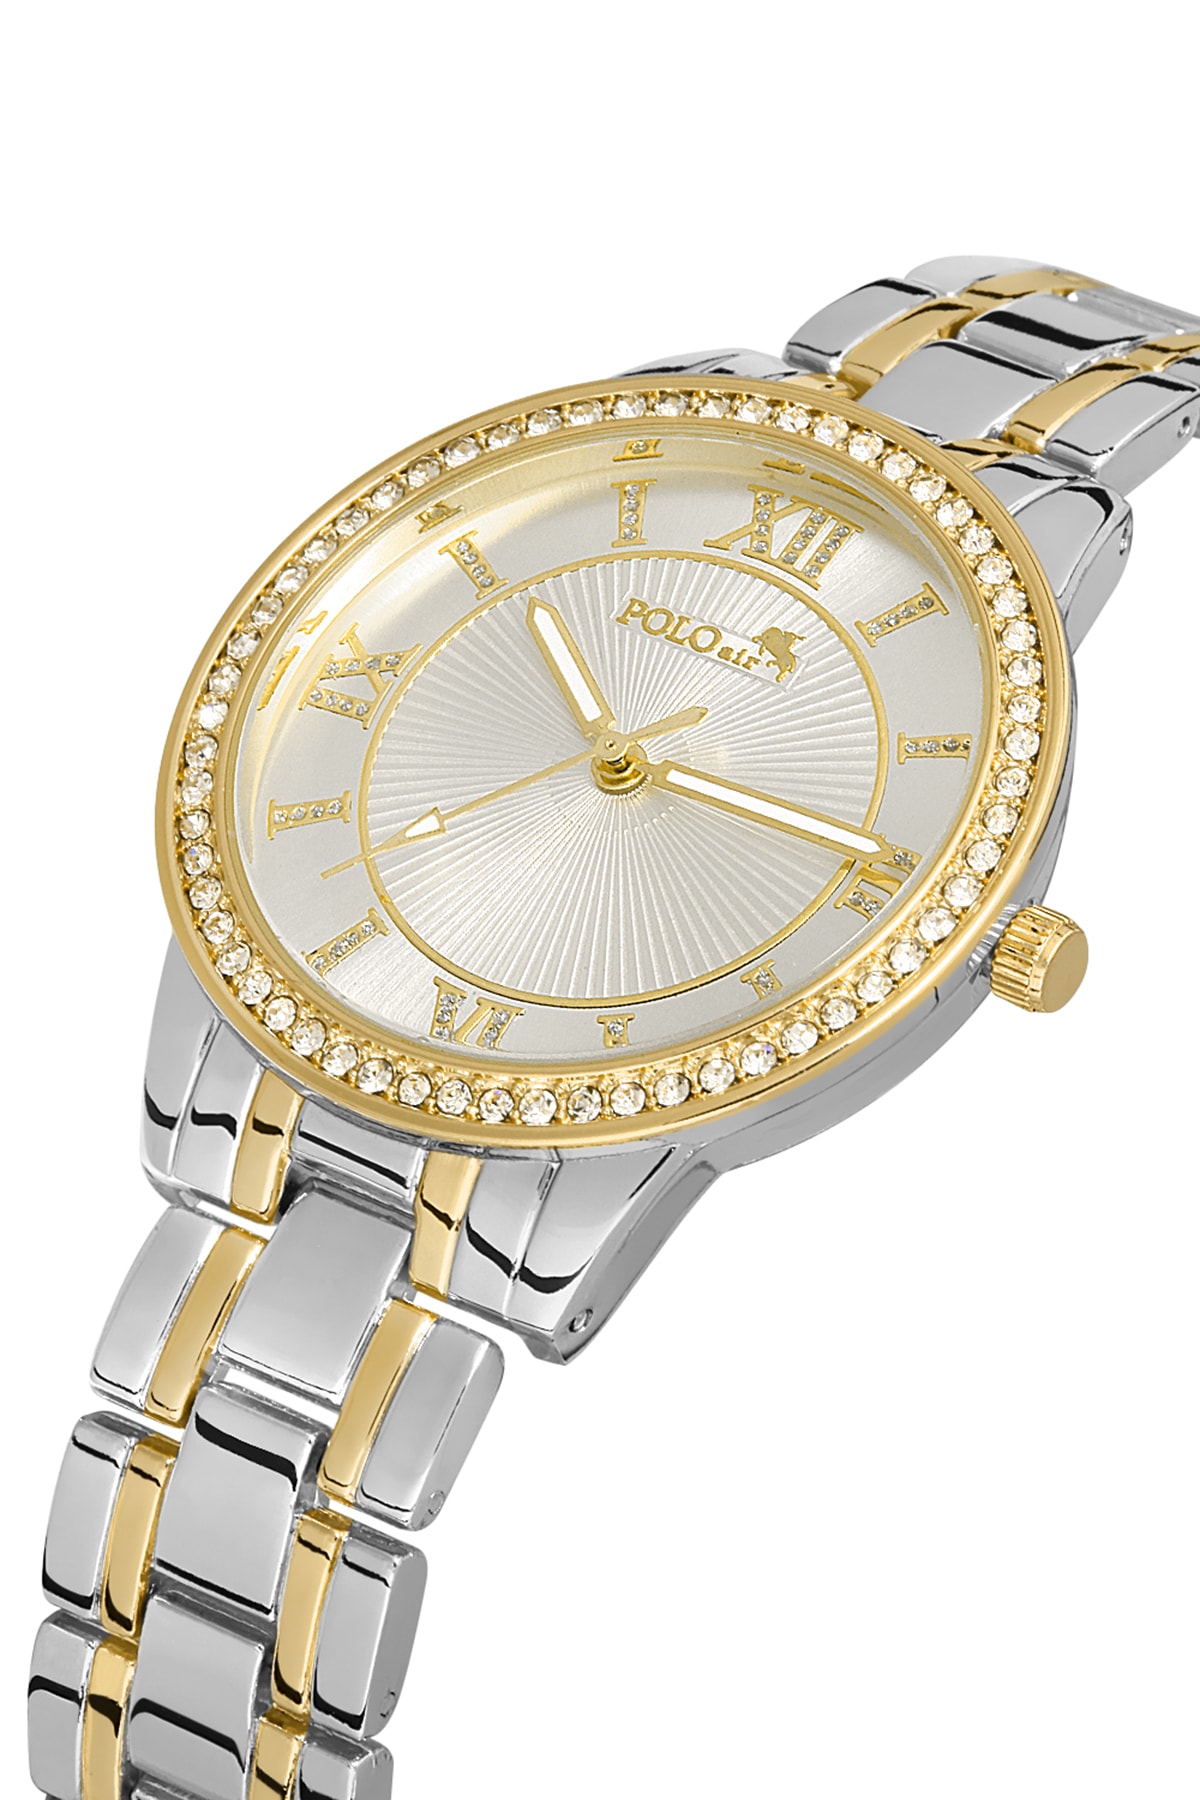 Polo Air Roman Numeral Single Row Luxury Stone Women's Wristwatch Silver-gold Color